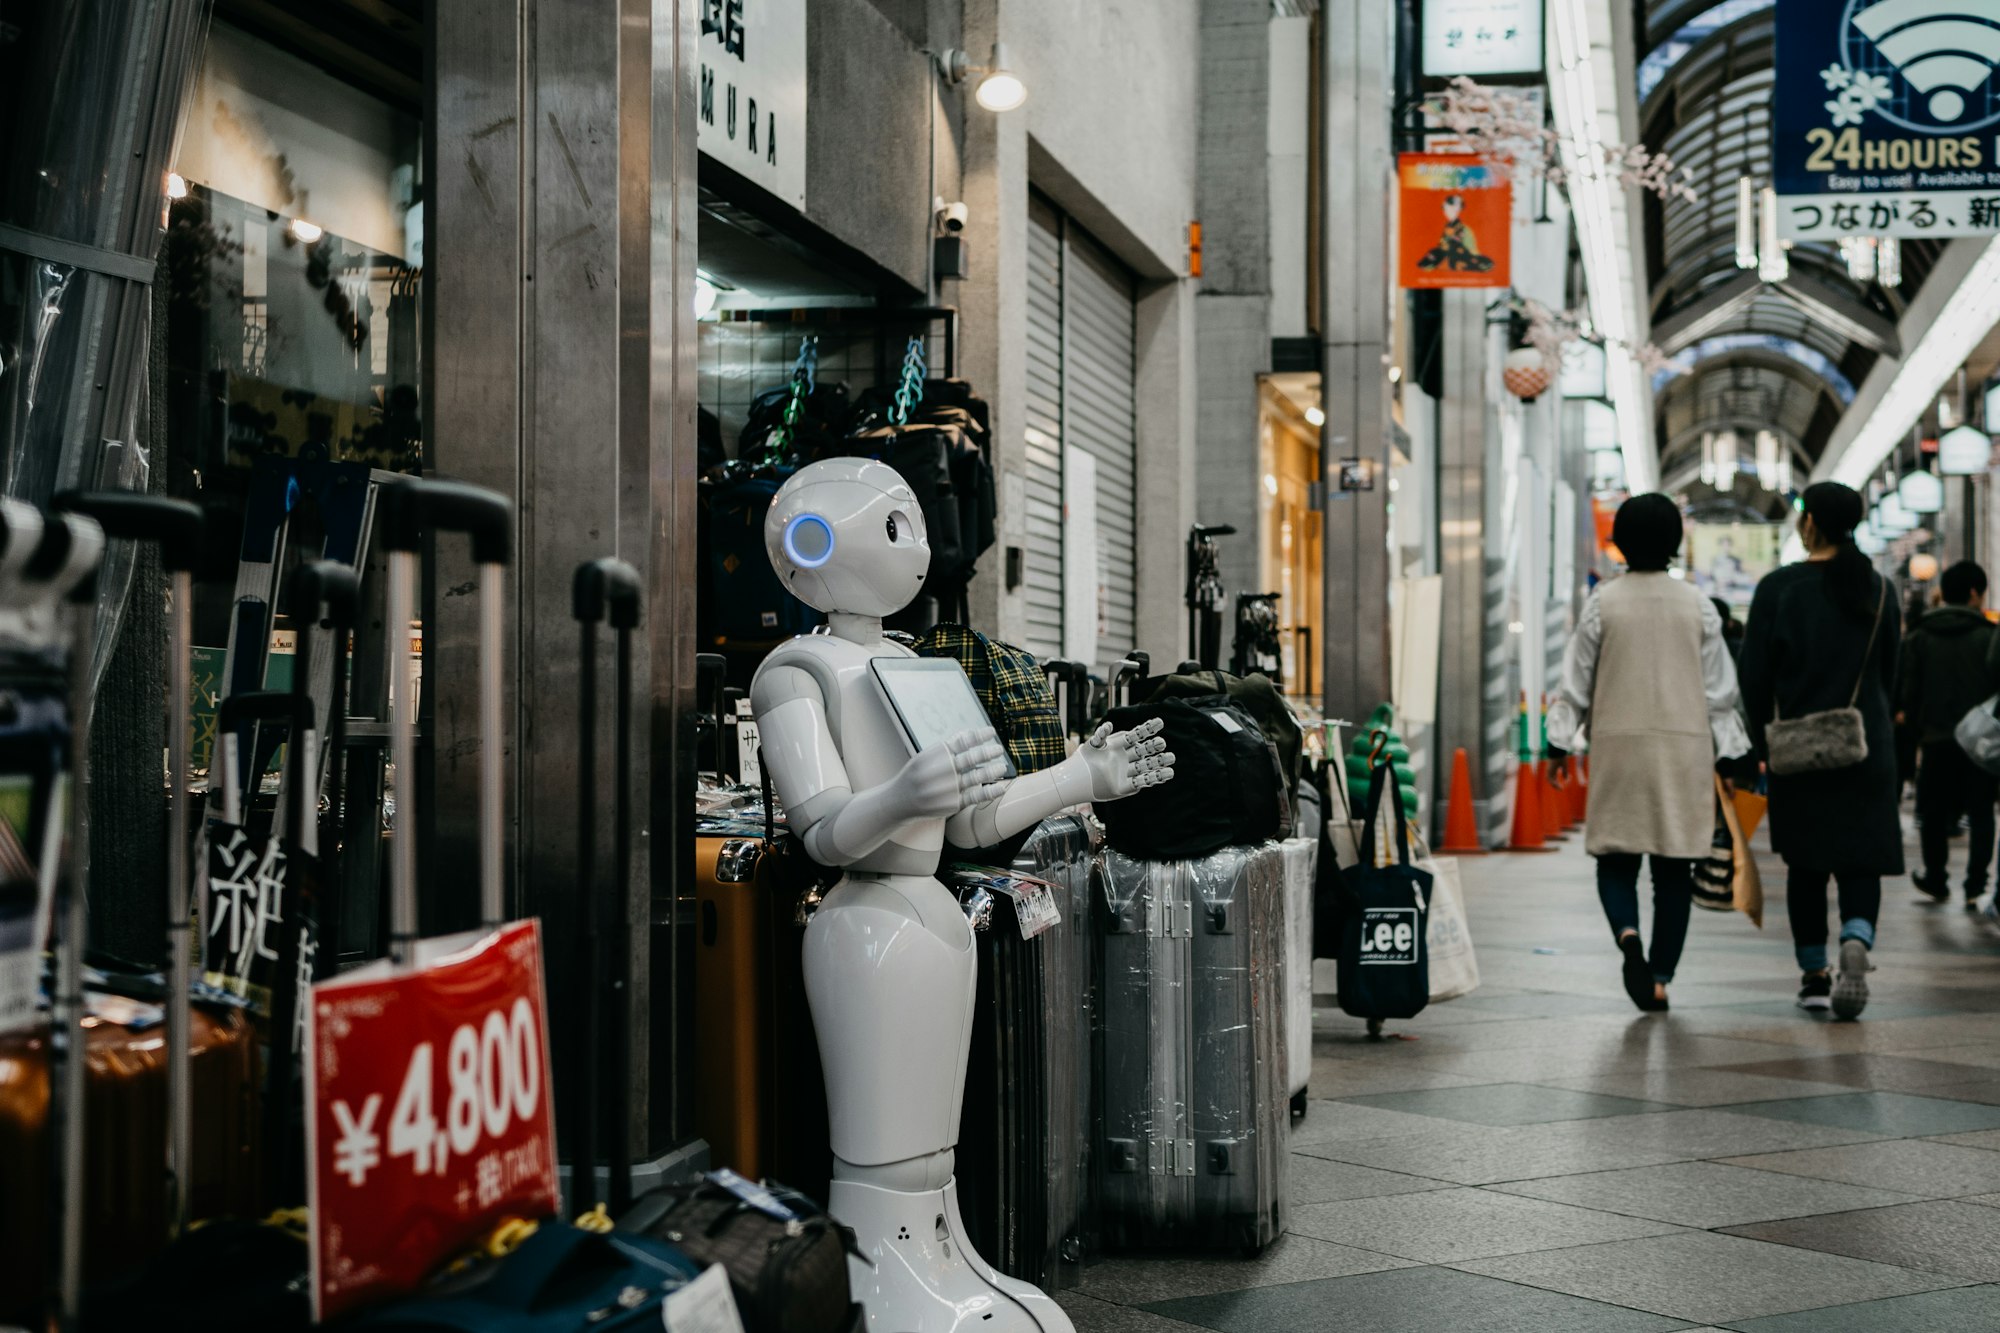 A Robot in a Shopping Mall in Kyoto